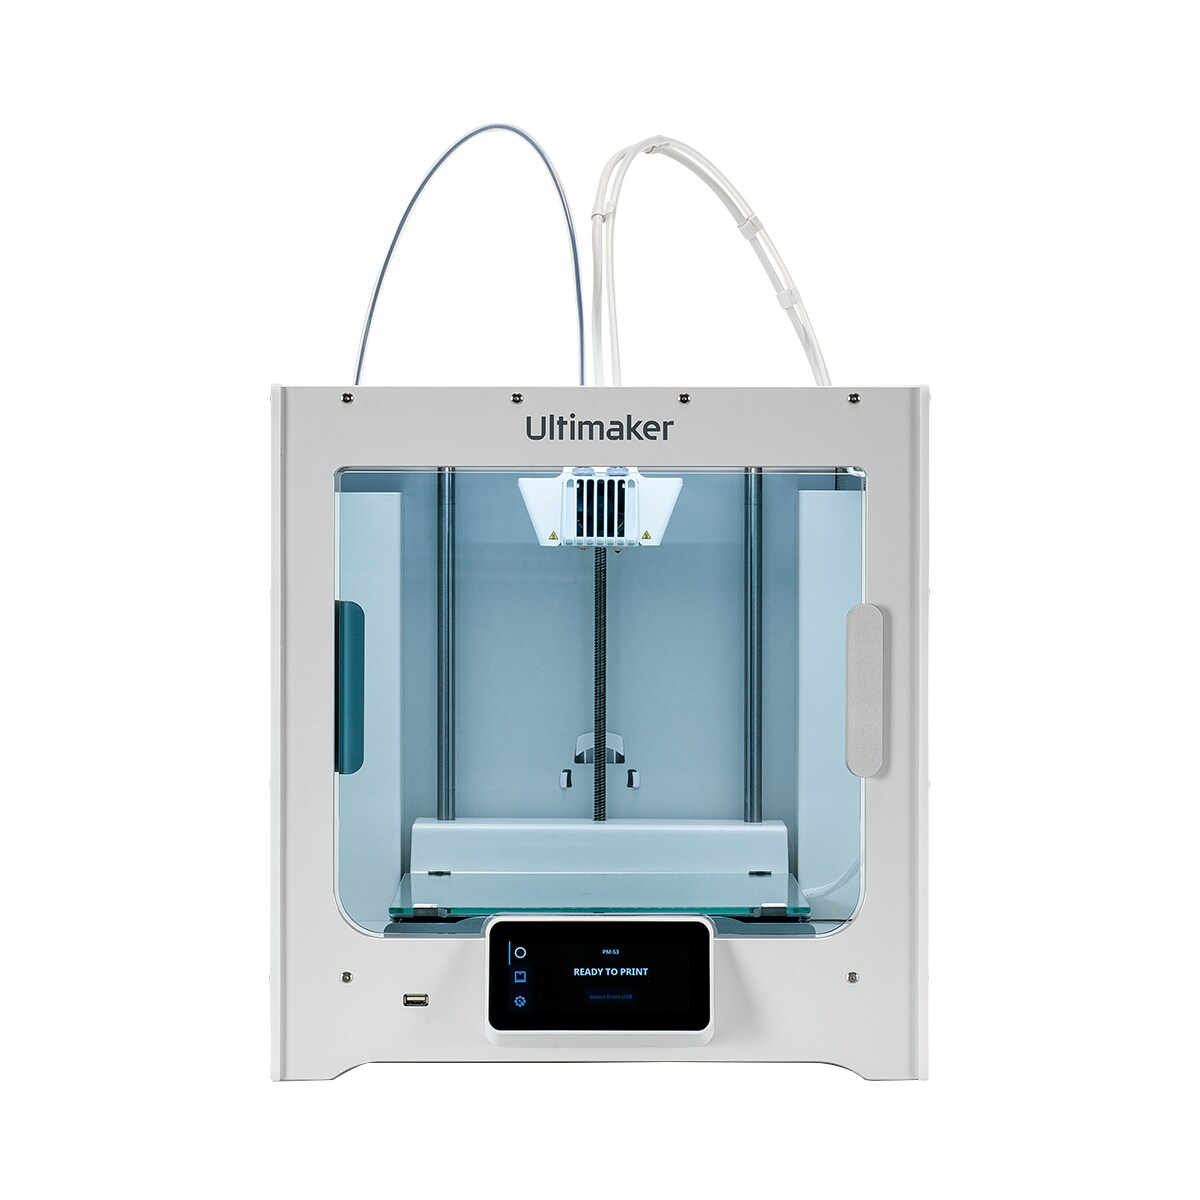 TEQ ULTIMAKER S3 (US CABLE)